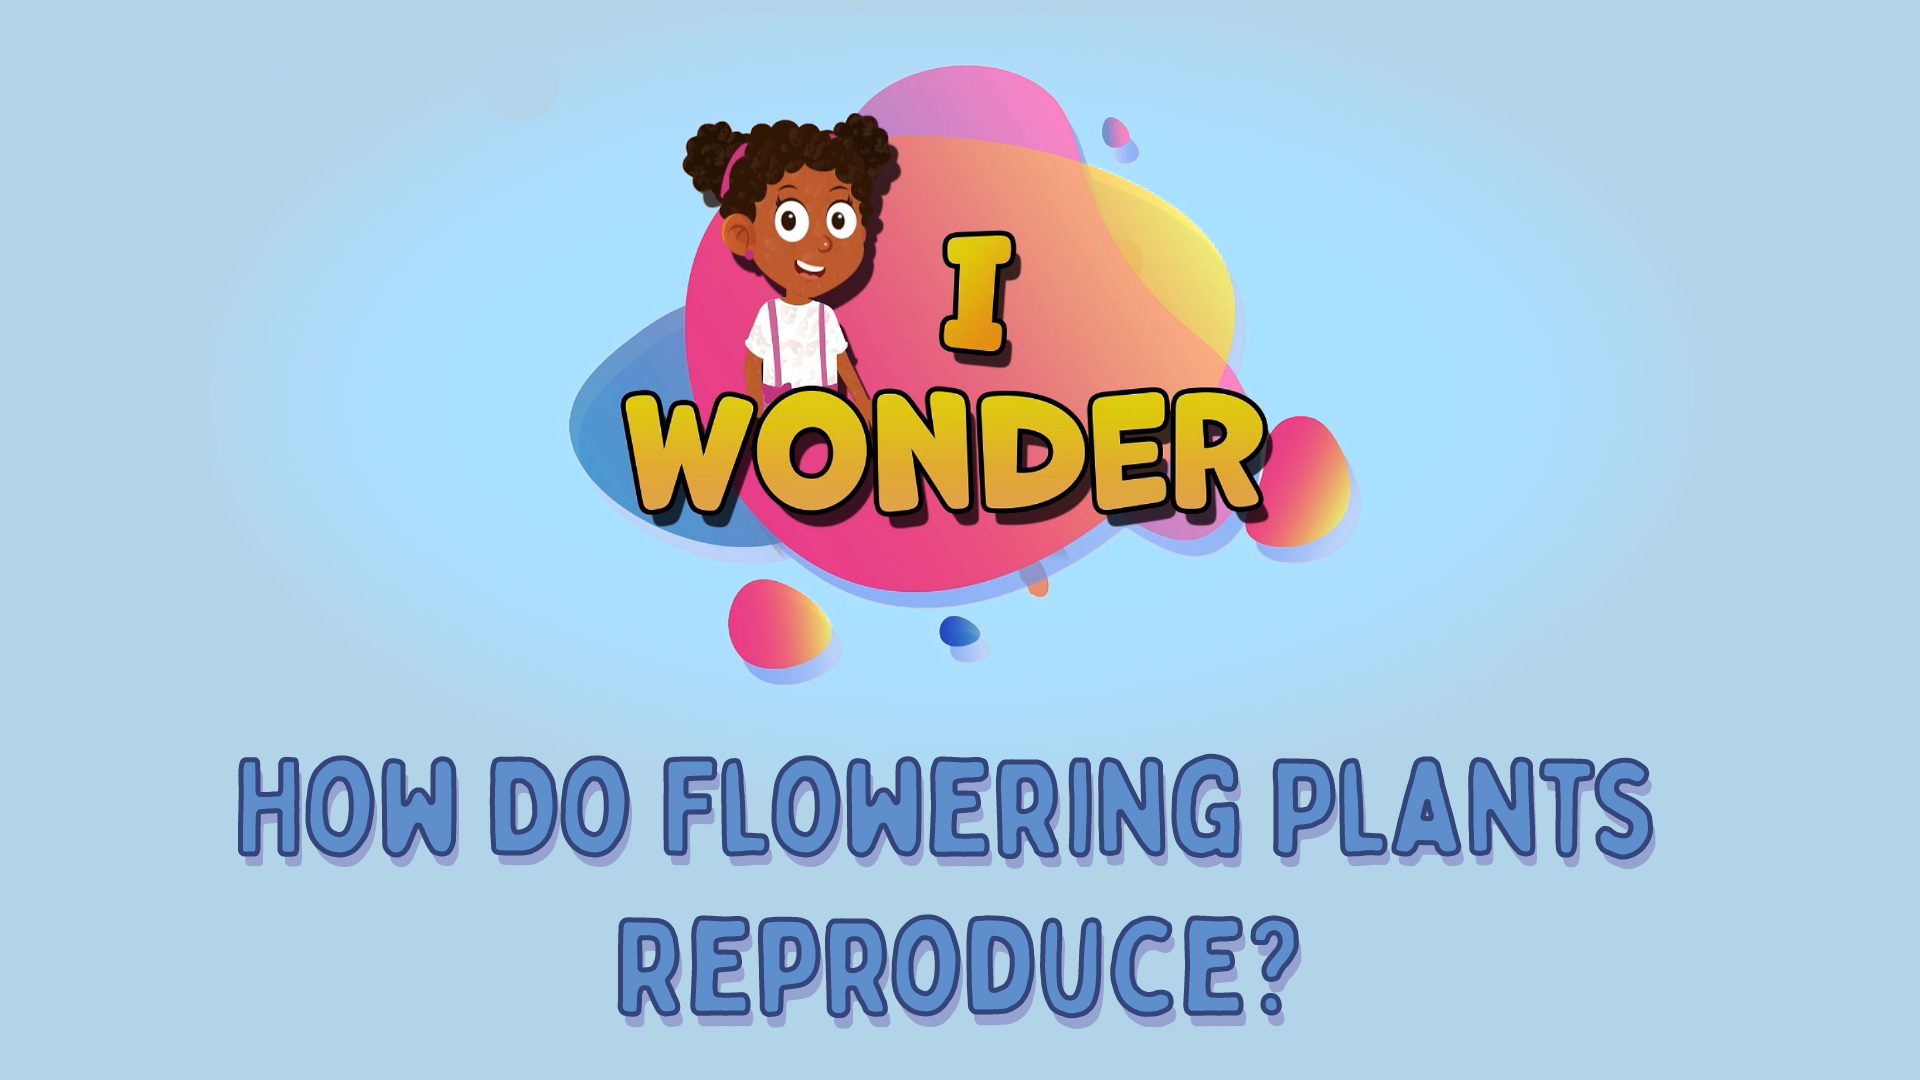 How Do Flowering Plants Reproduce?